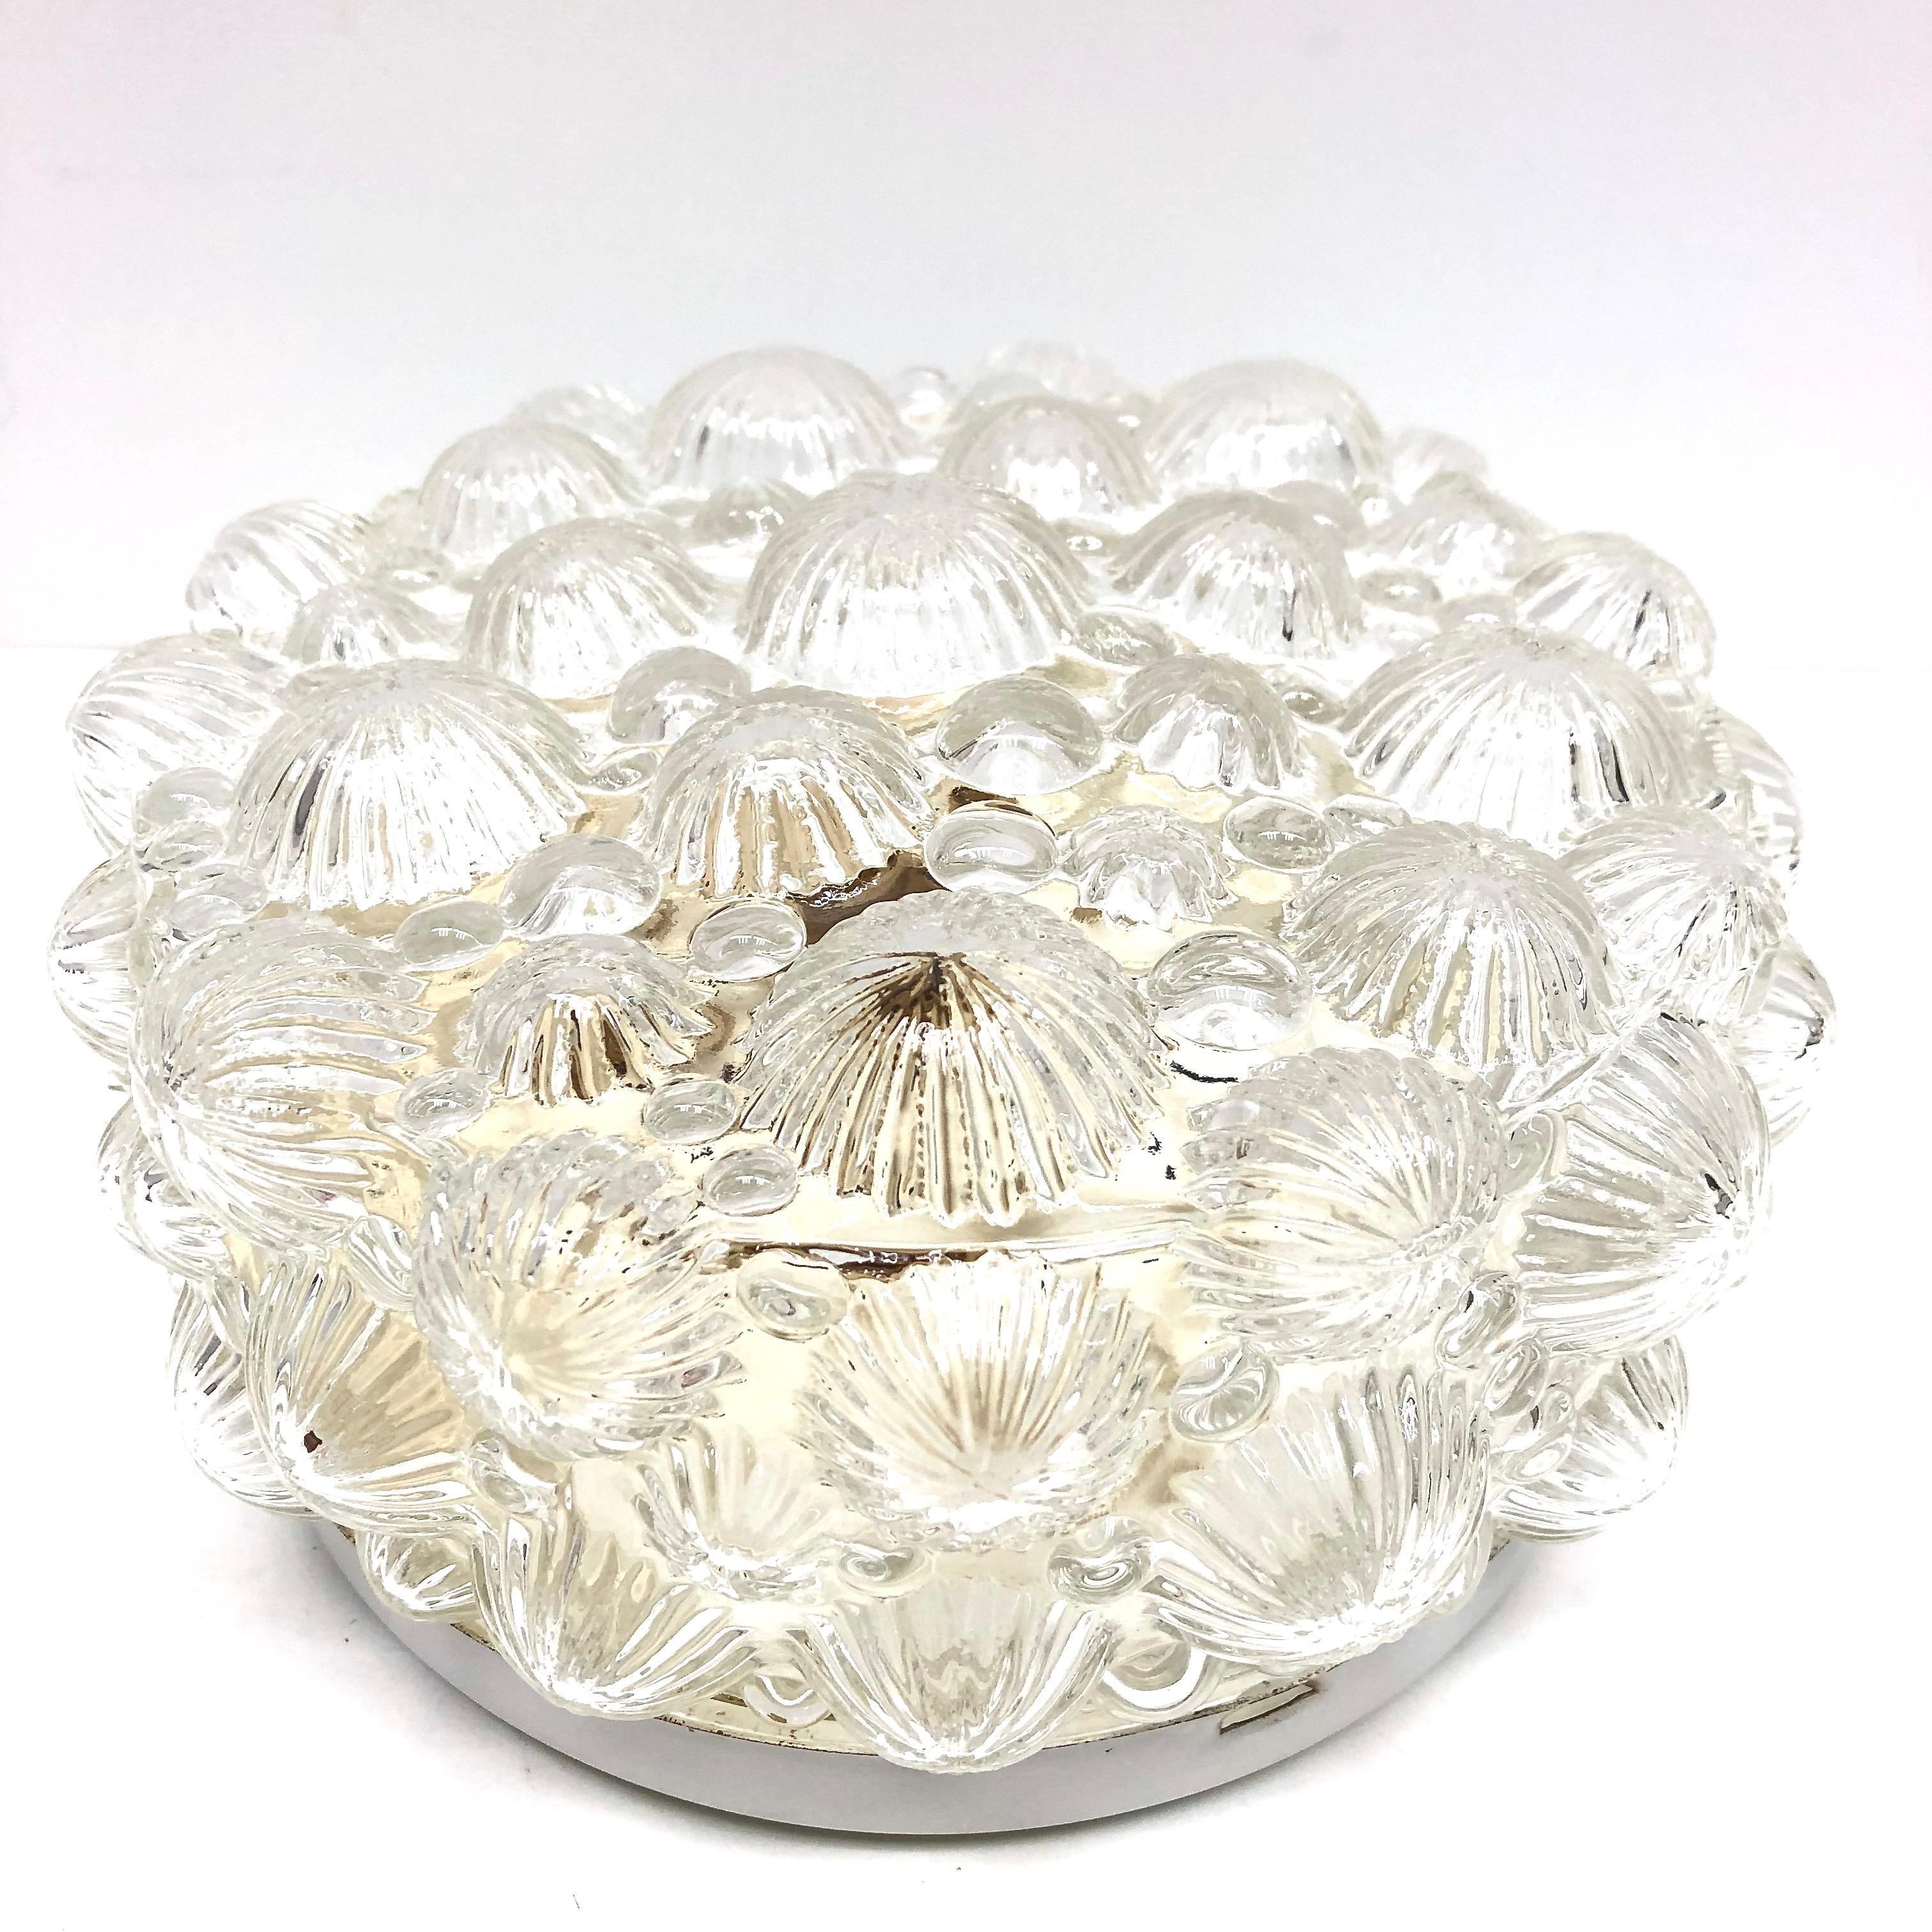 A beautiful flush mount manufactured by RZB Leuchten. It is a clear glass on a metal frame. The fixture requires one European
E27 / 110 Volt Edison bulb, up to 60 watts. Also a nice wall lamp for your entry hall or just a ceiling light.